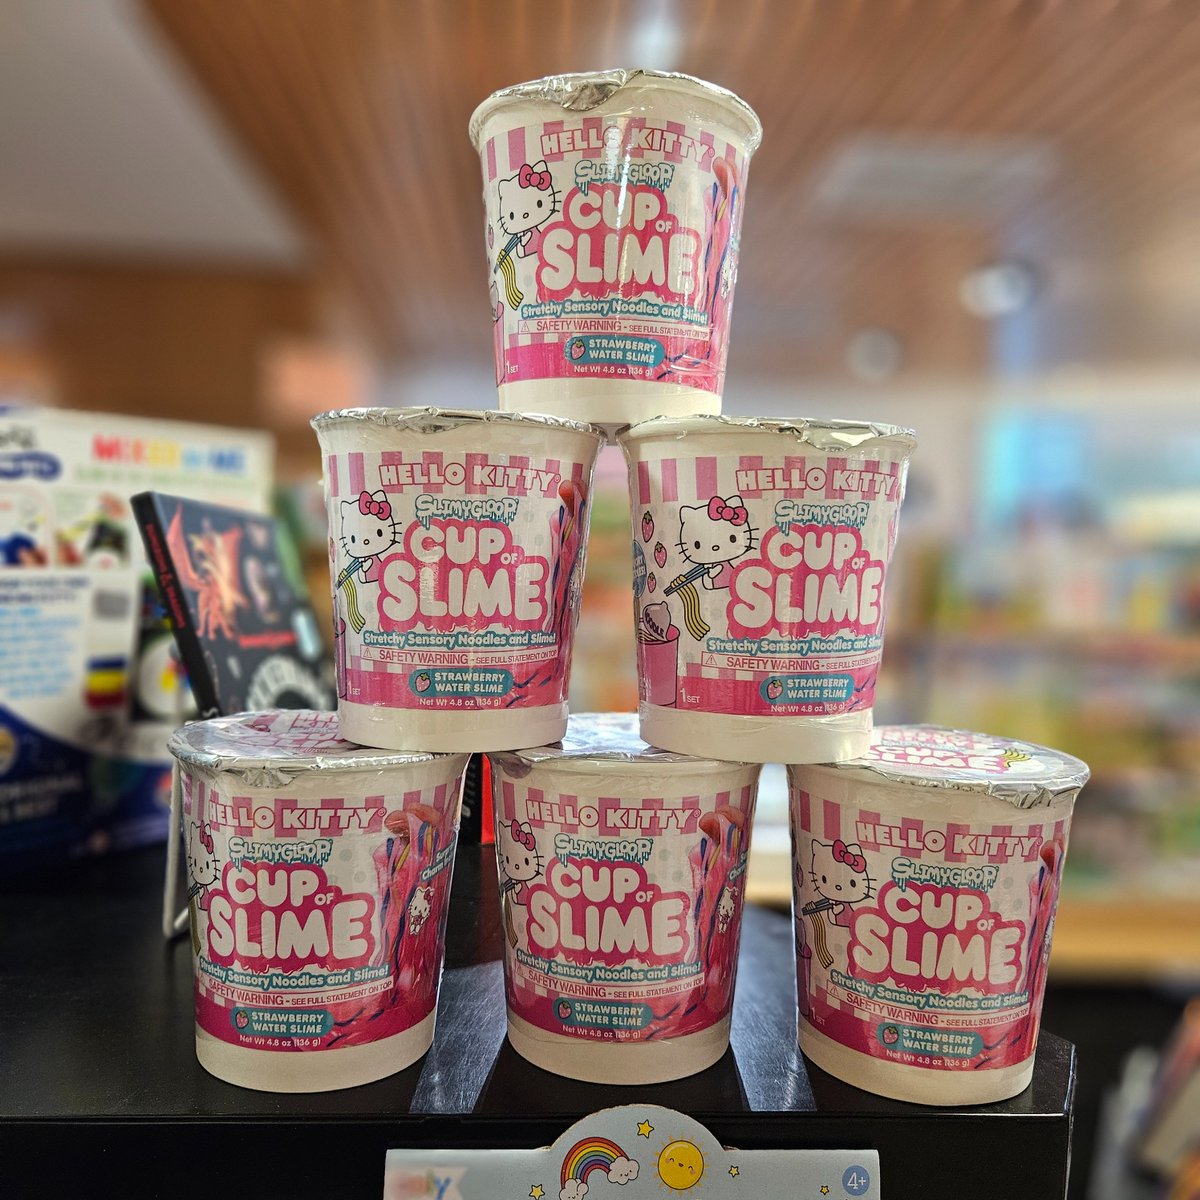 This just in: We now sell cup noodles!
.
.
.
.
.
.
#AprilFools, it's actually SLIME! #MustHaveMonday #toys #independentbookstore